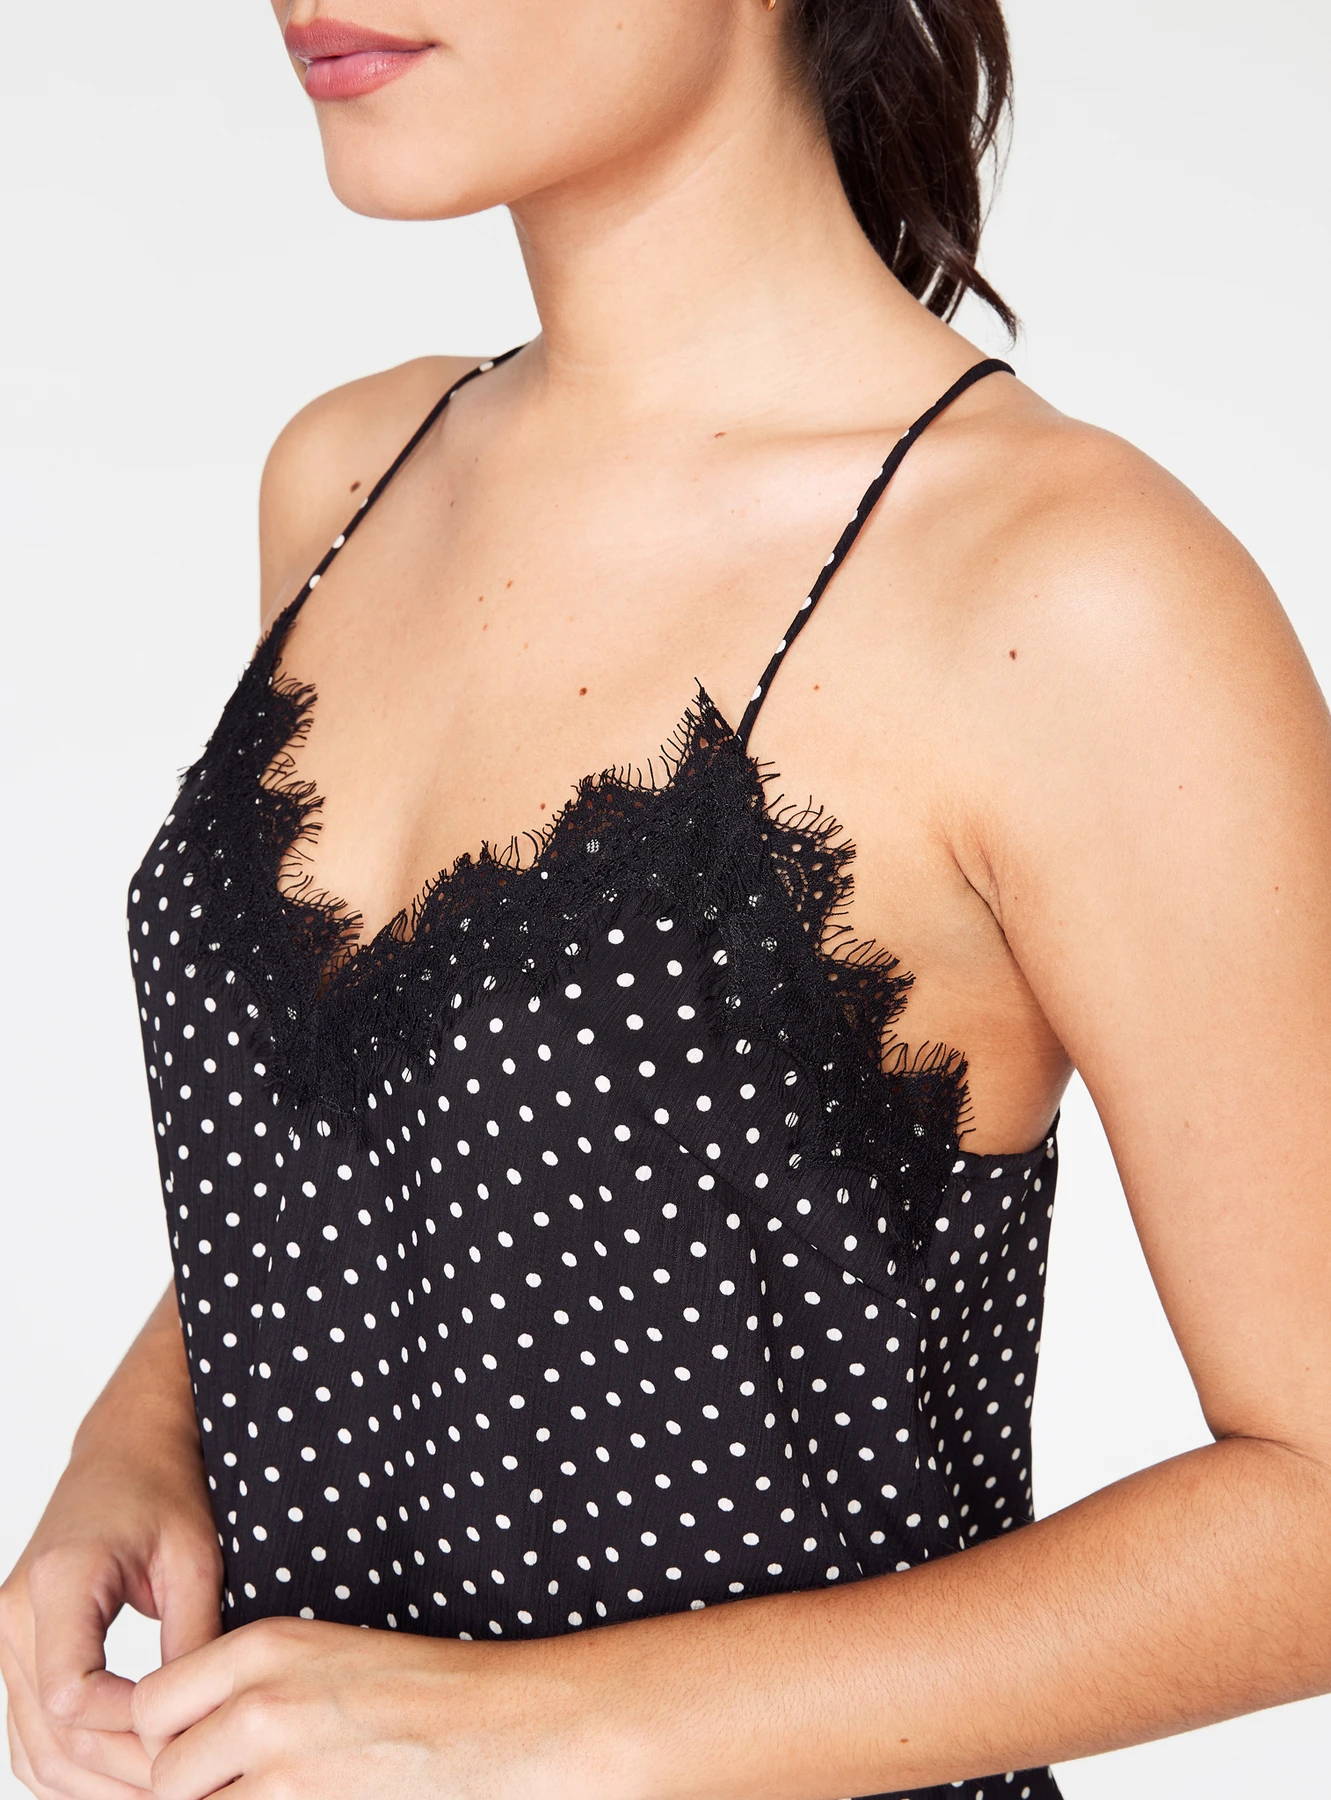 Black and White Polka Dot Lace Cami Top